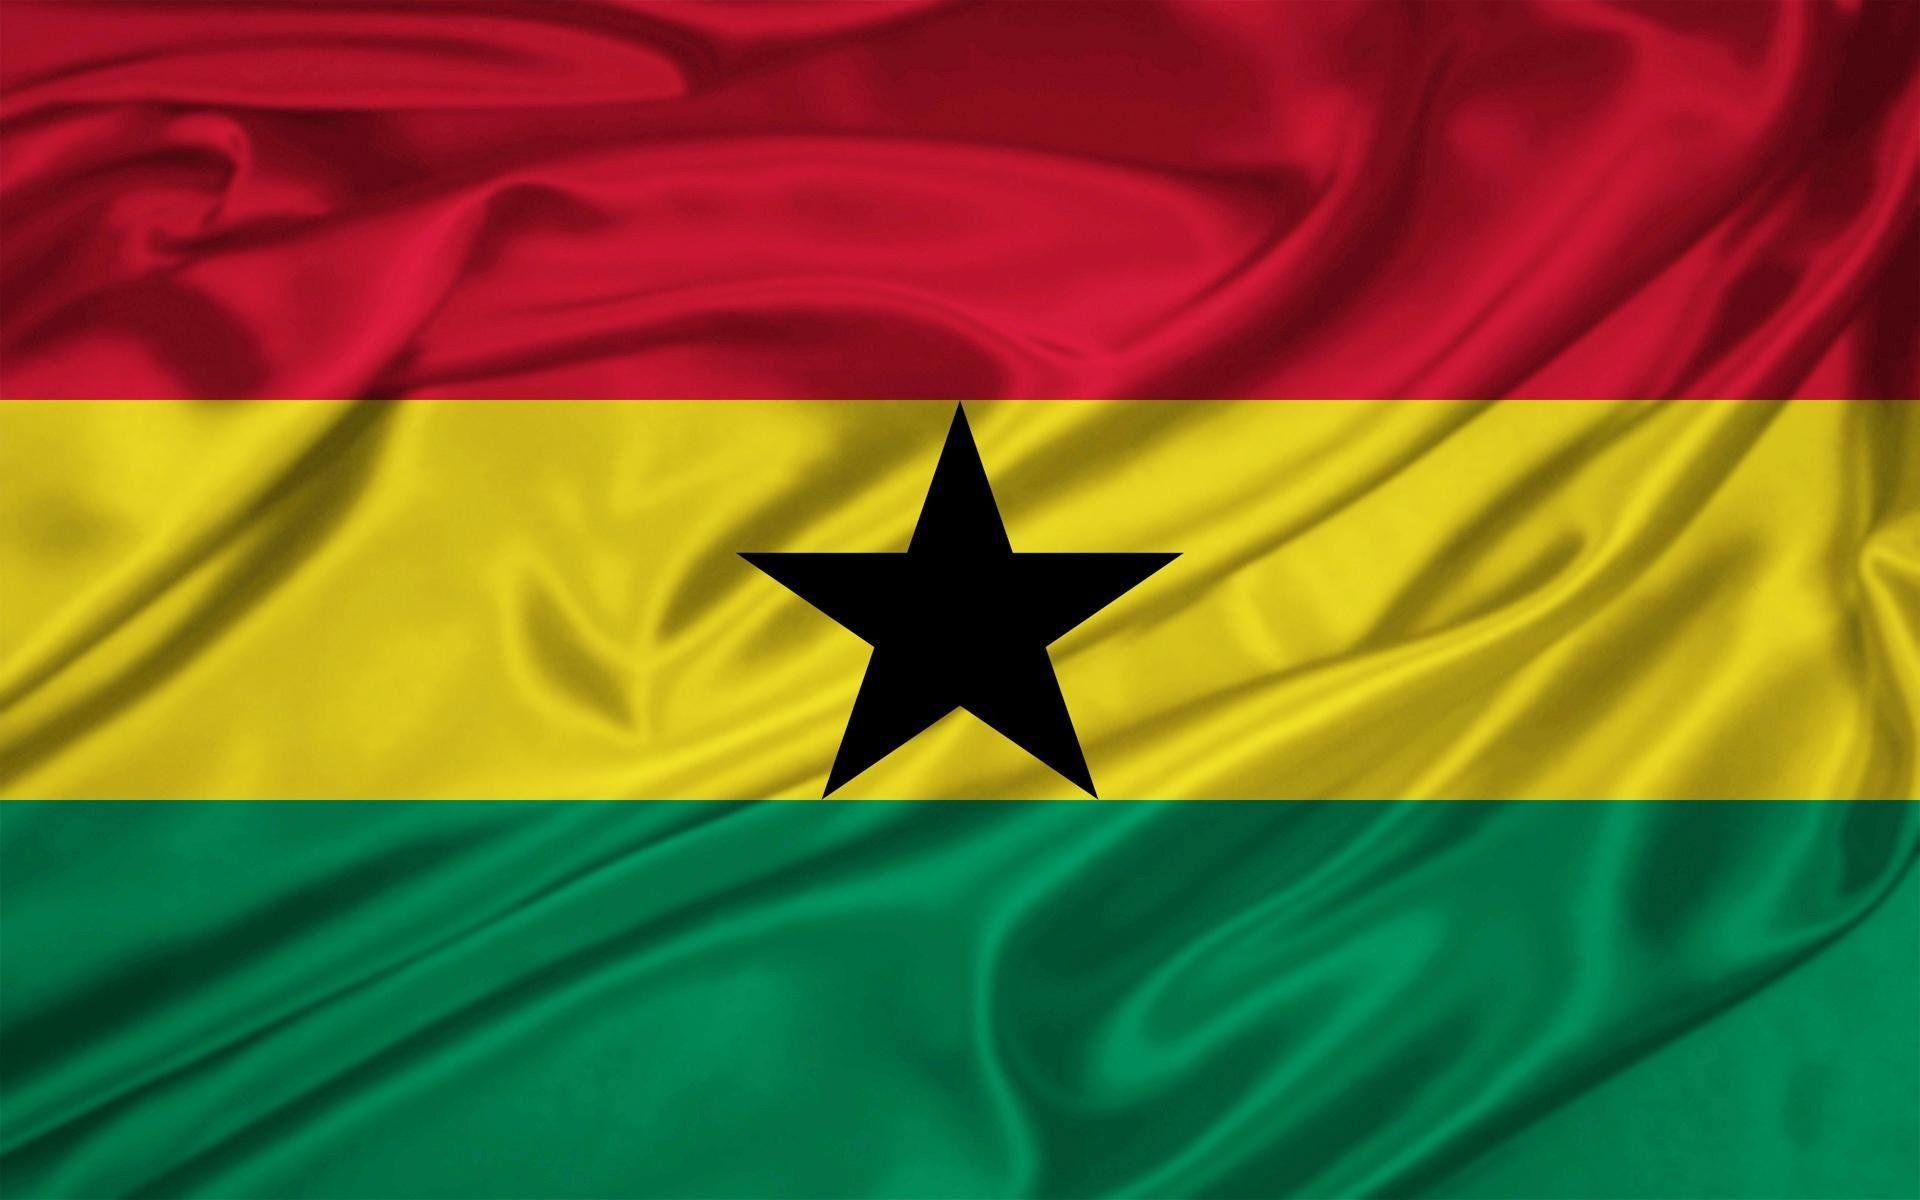 Ghana Flag Wallpaper Android Apps on Google Play. HD Wallpaper